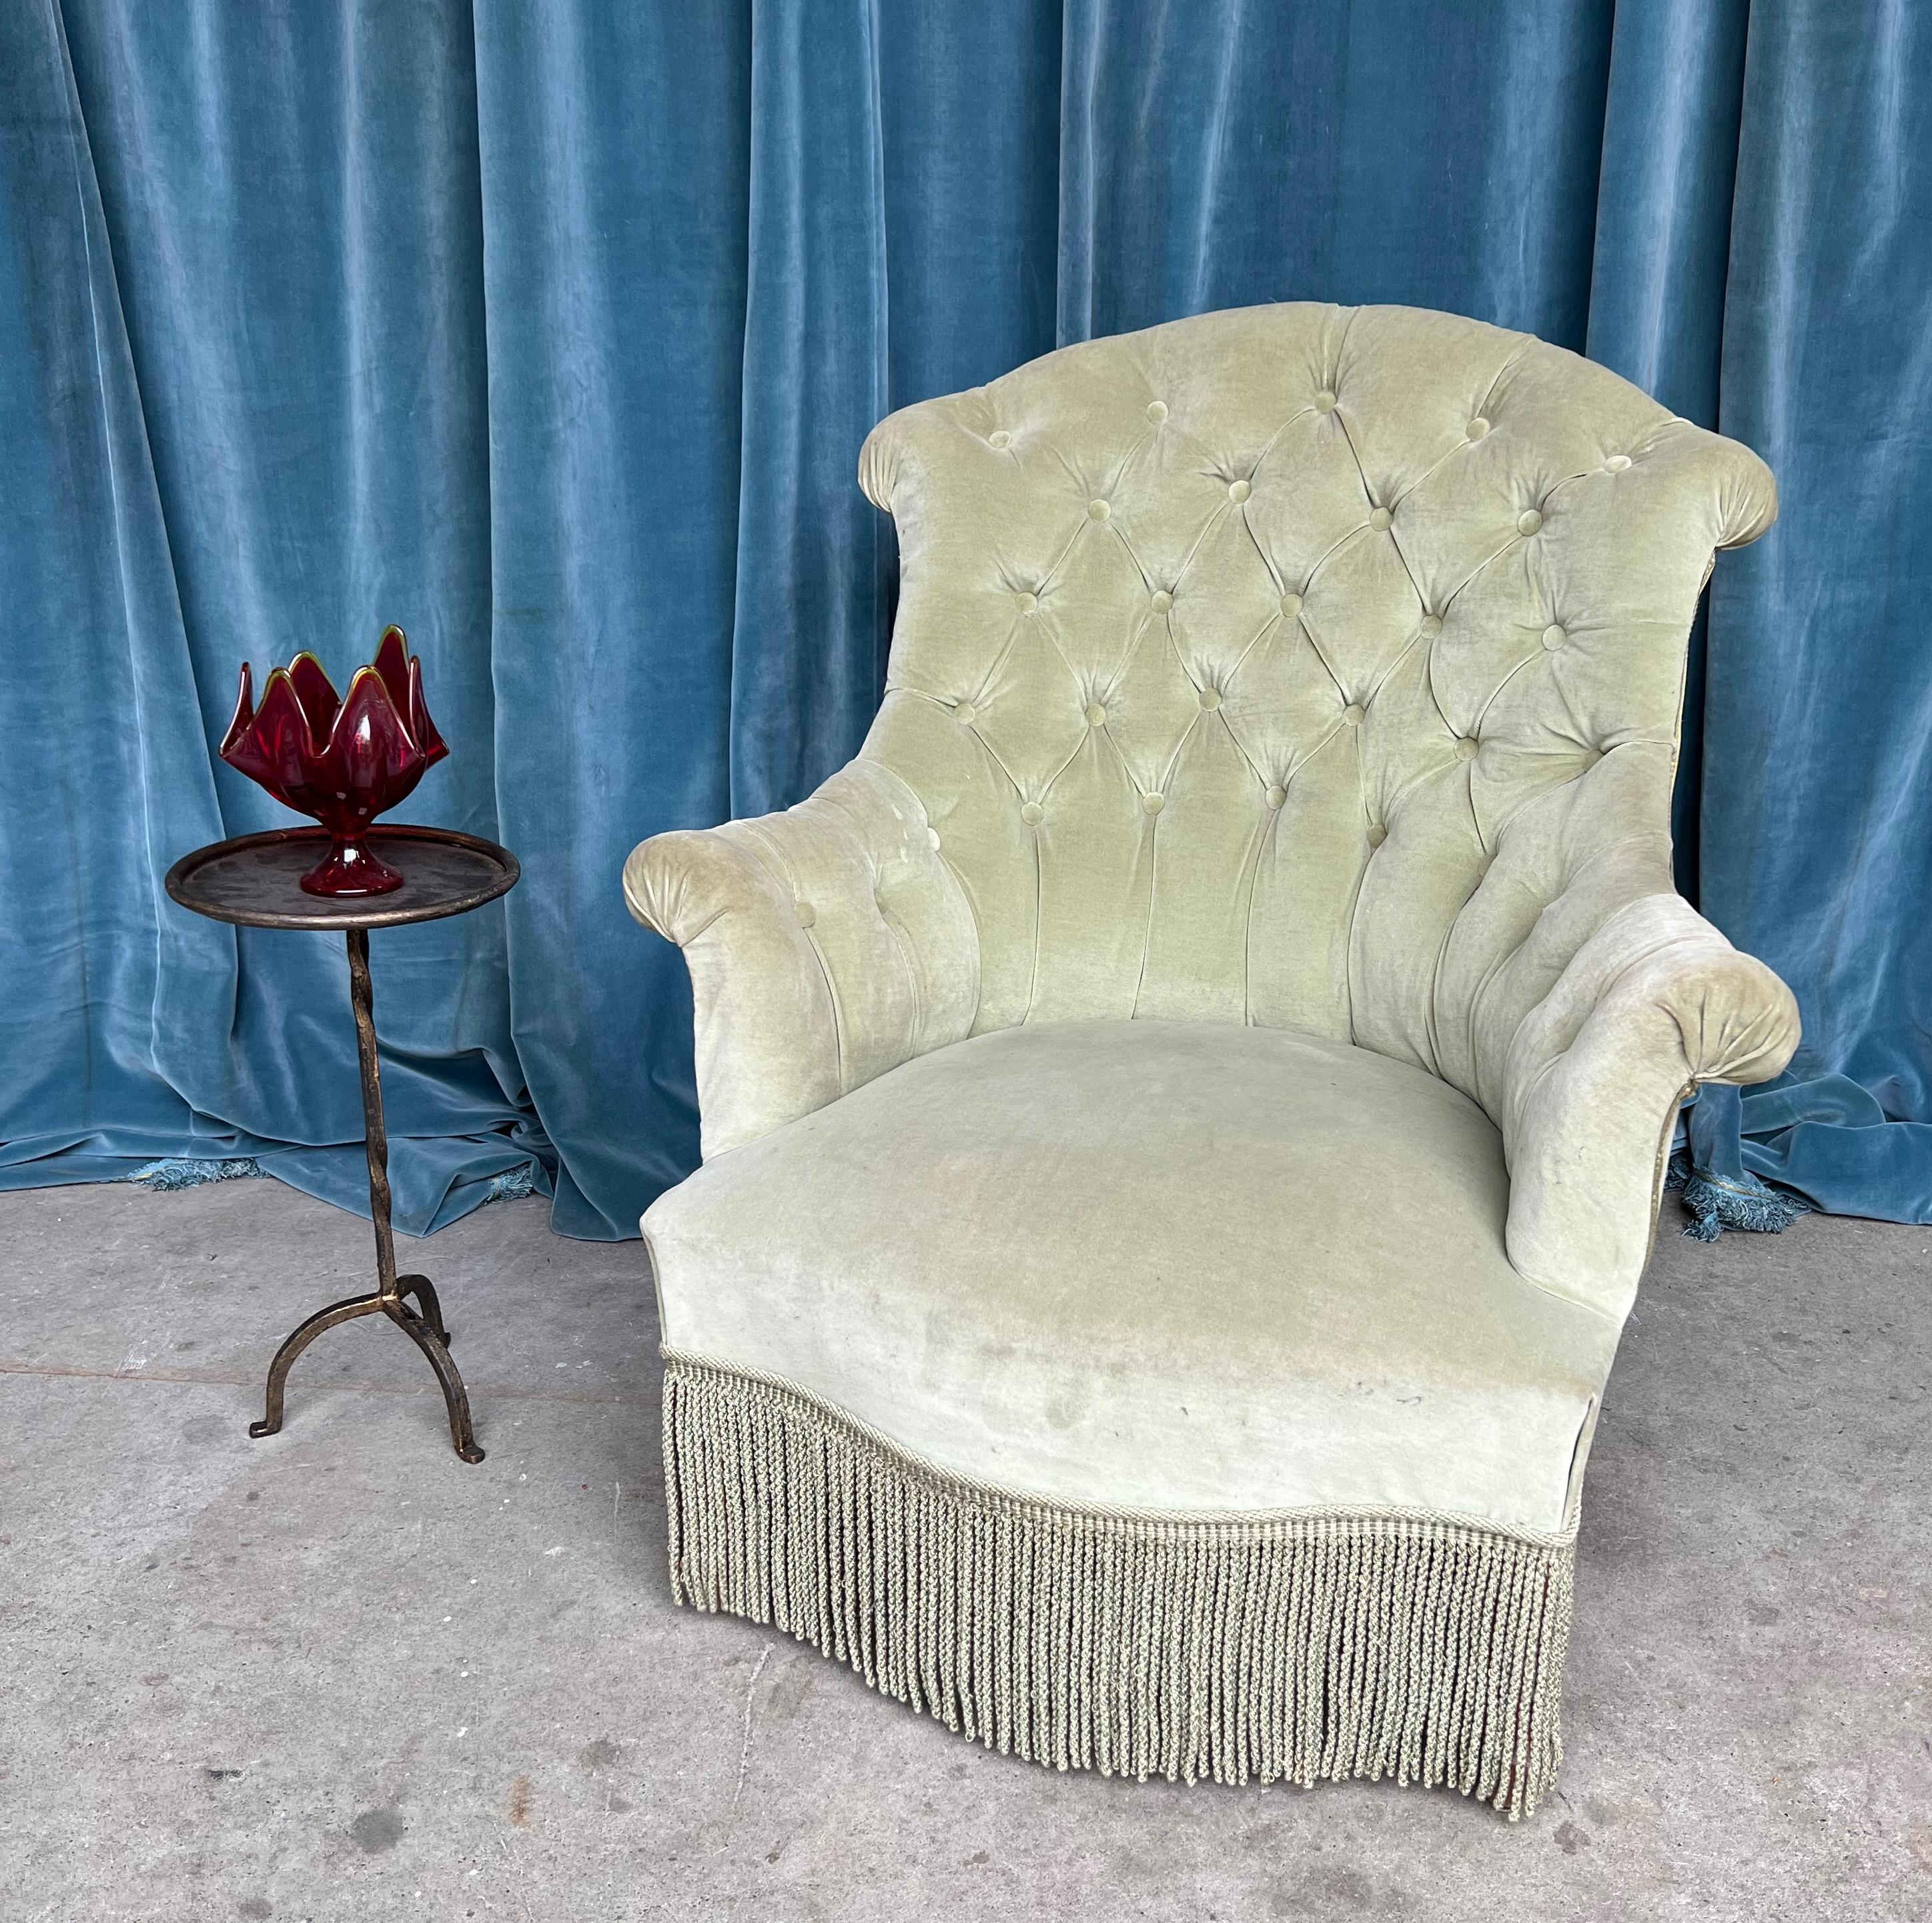 This late 19th century armchair, originating from the Napoleon III period, presents a blend of comfort and elegance. Upholstered in vintage sage green velvet, it features a tufted back that adds to its charm and sophistication. The matching bullion